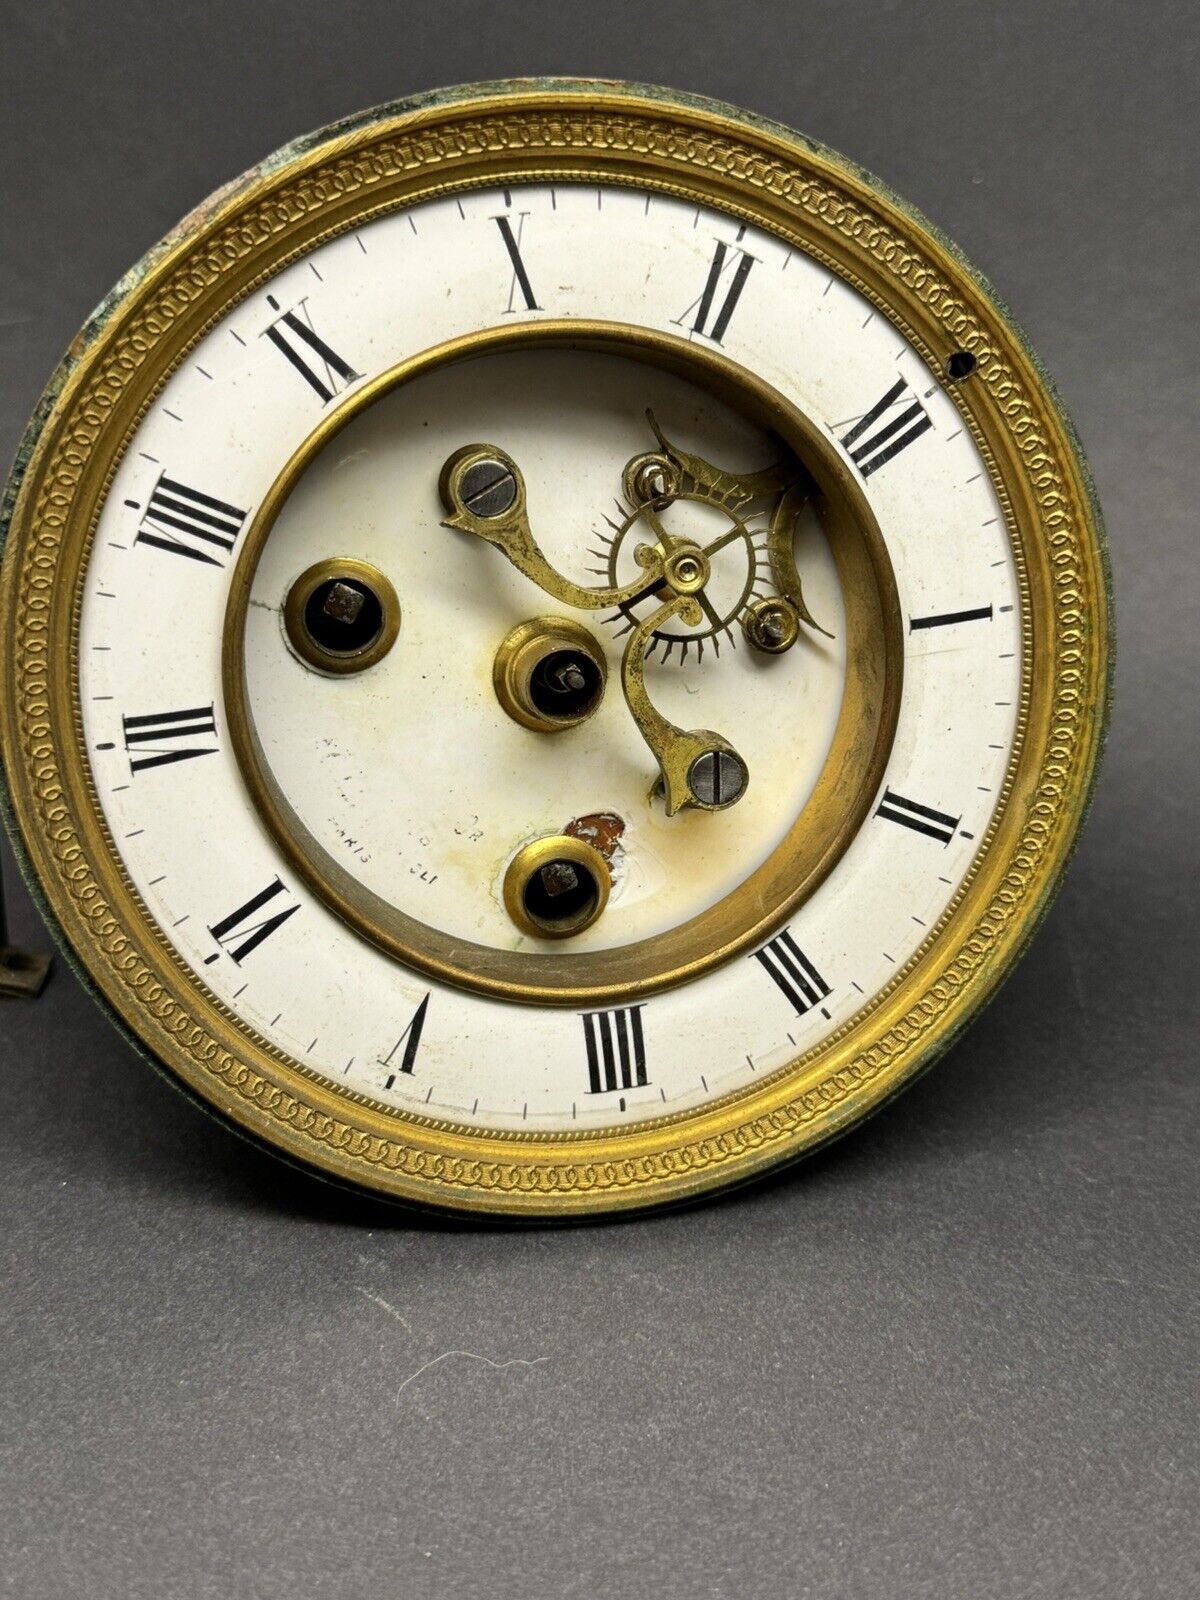 Antique French J Marti Clock Movement and additional parts